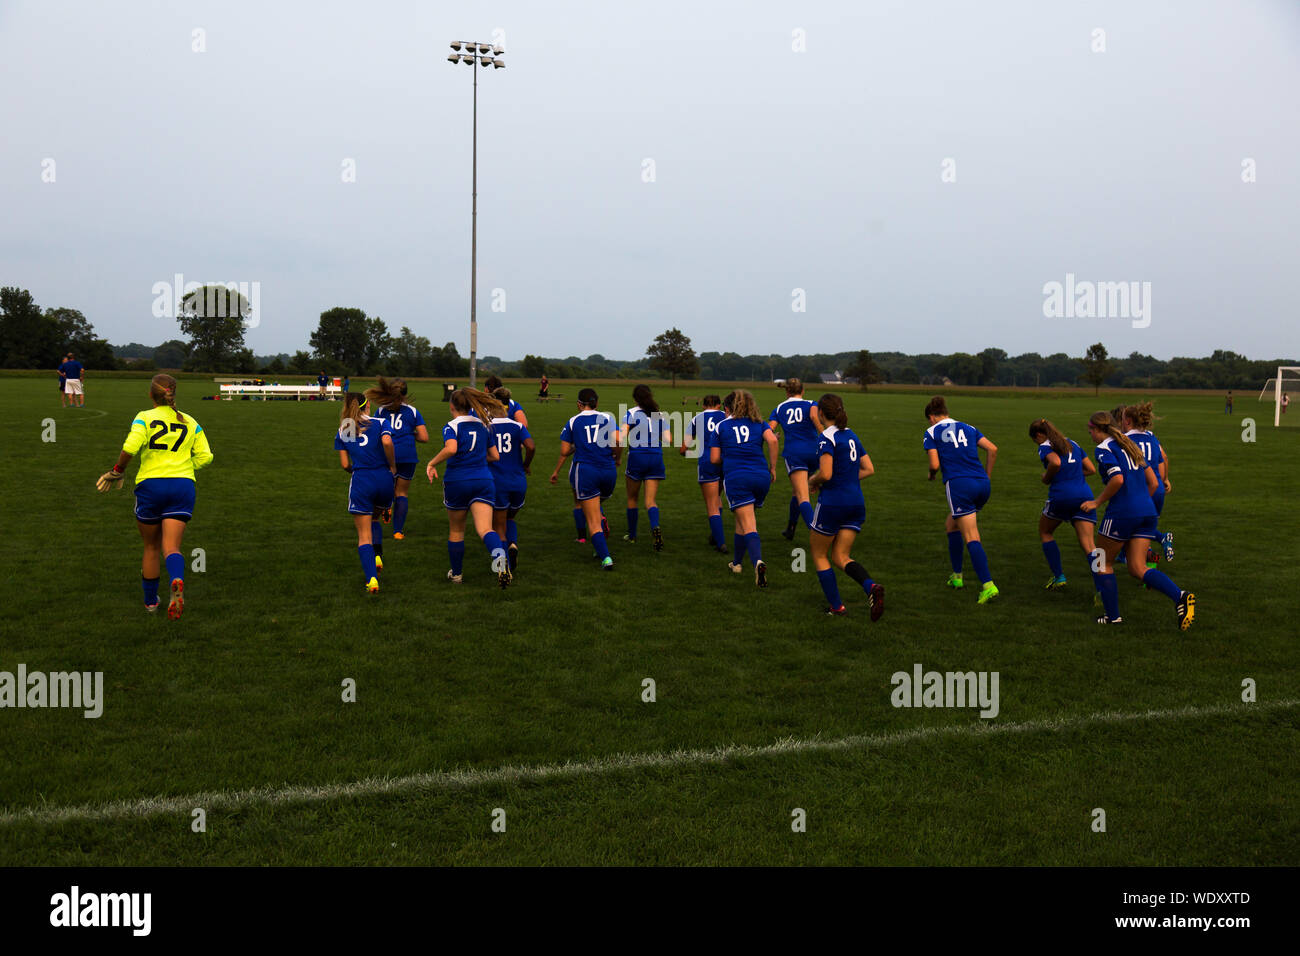 A high school girls' soccer team takes the field at Kreager Park in Fort Wayne, Indiana, USA. Stock Photo